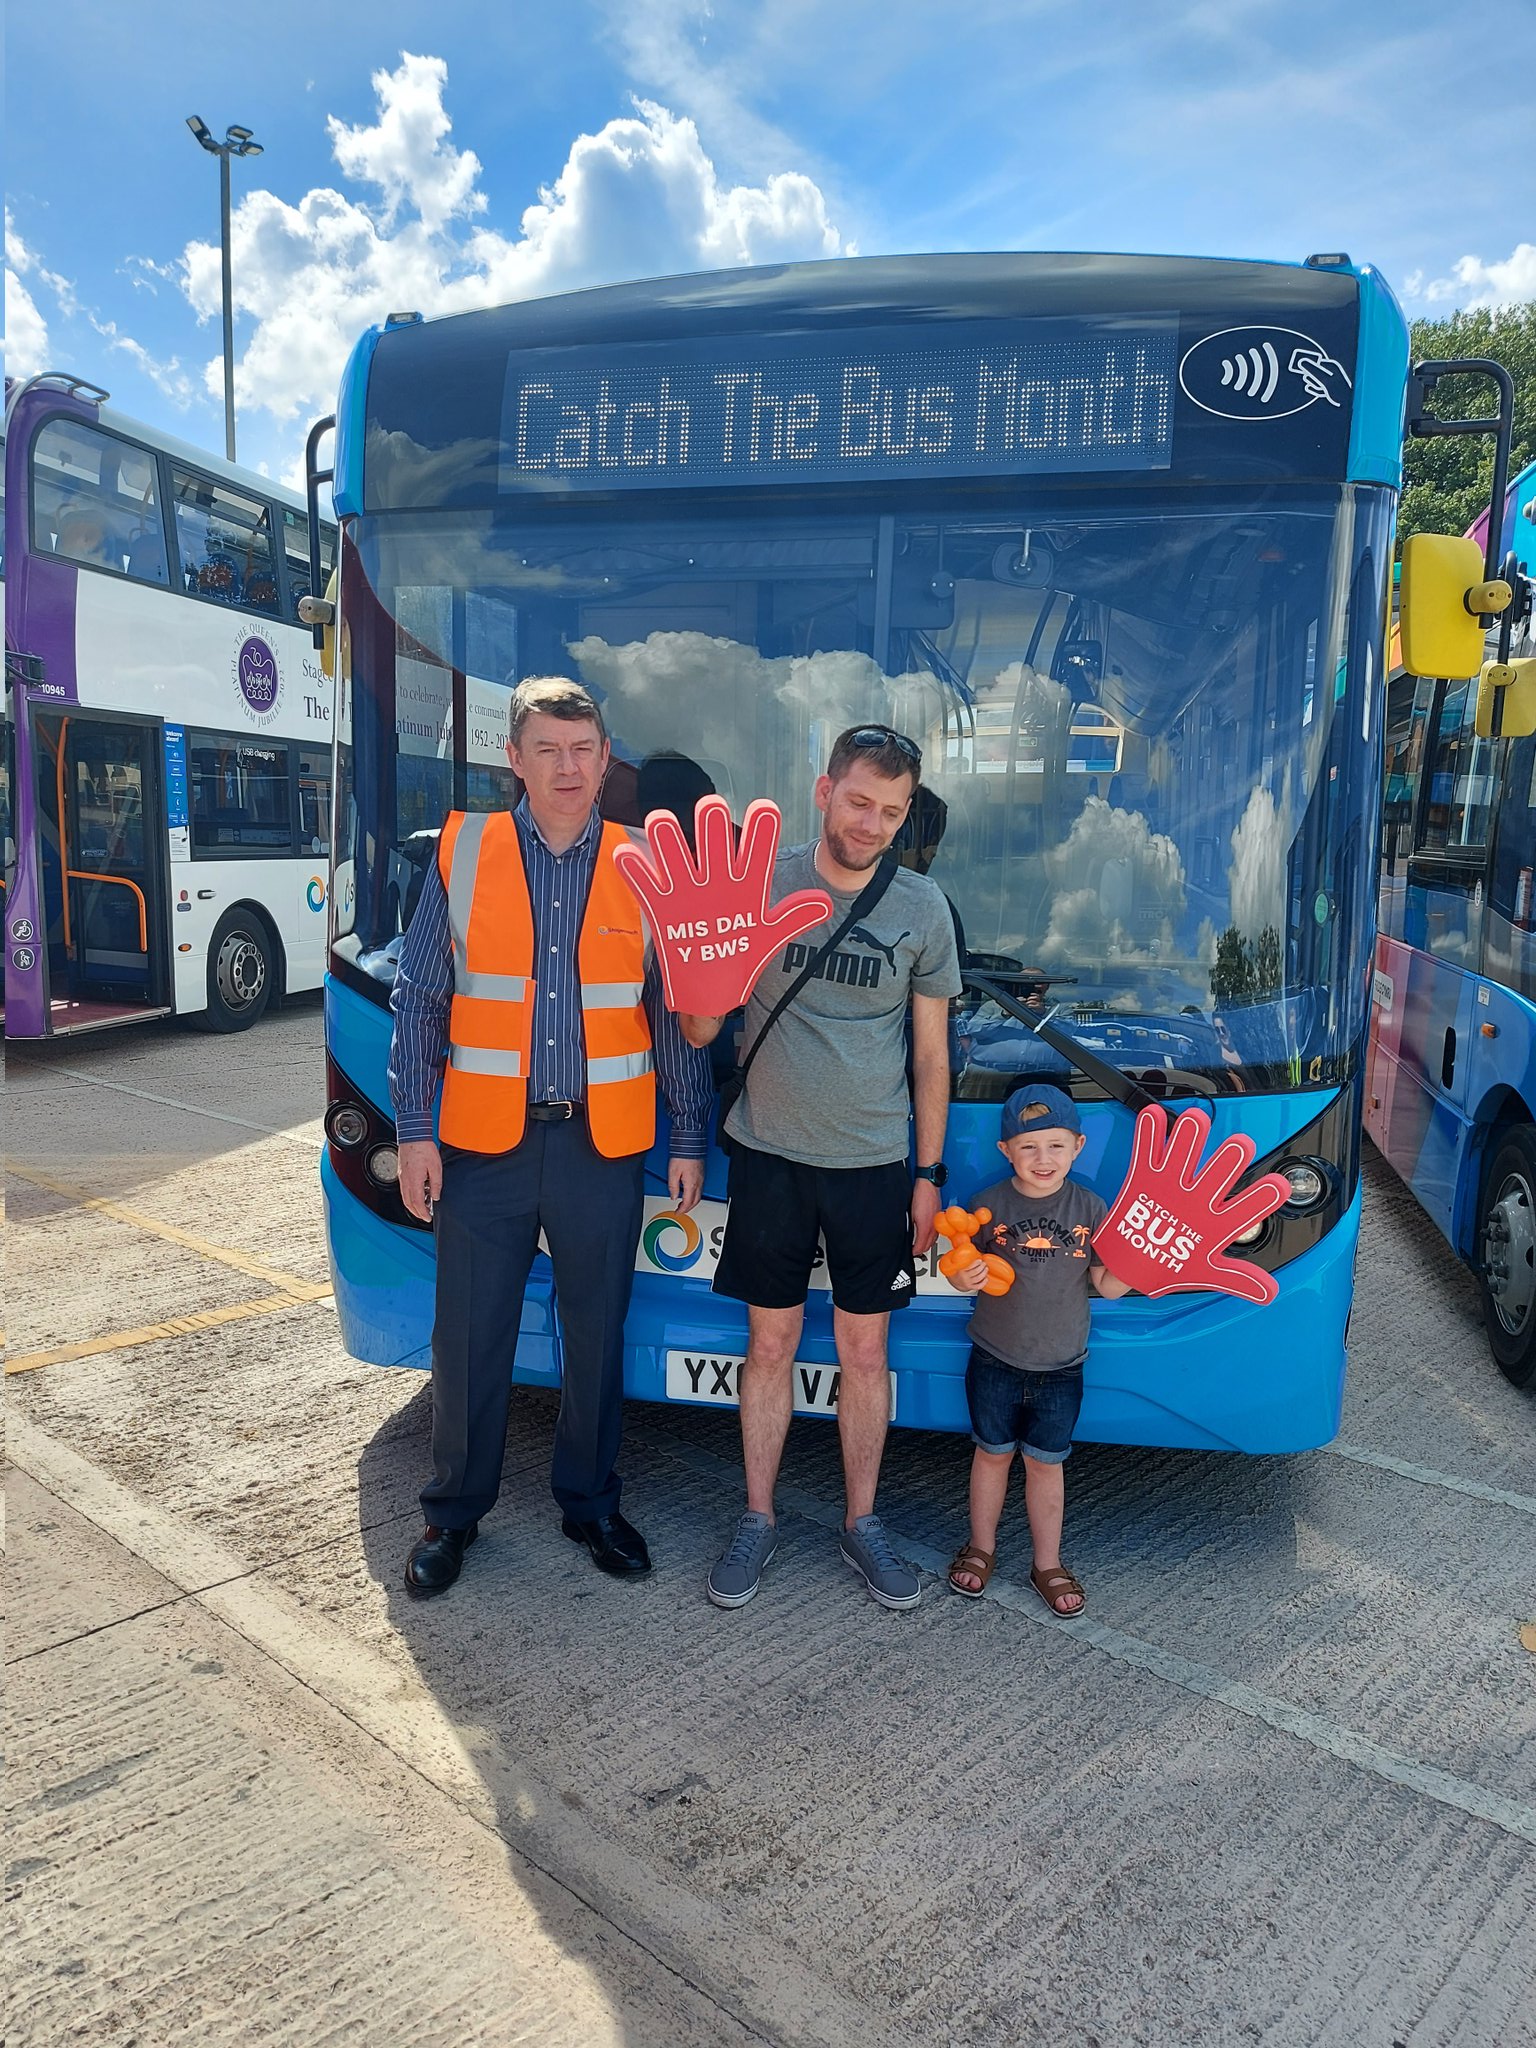 stagecoach south wales open day with father and son holding giant red hands